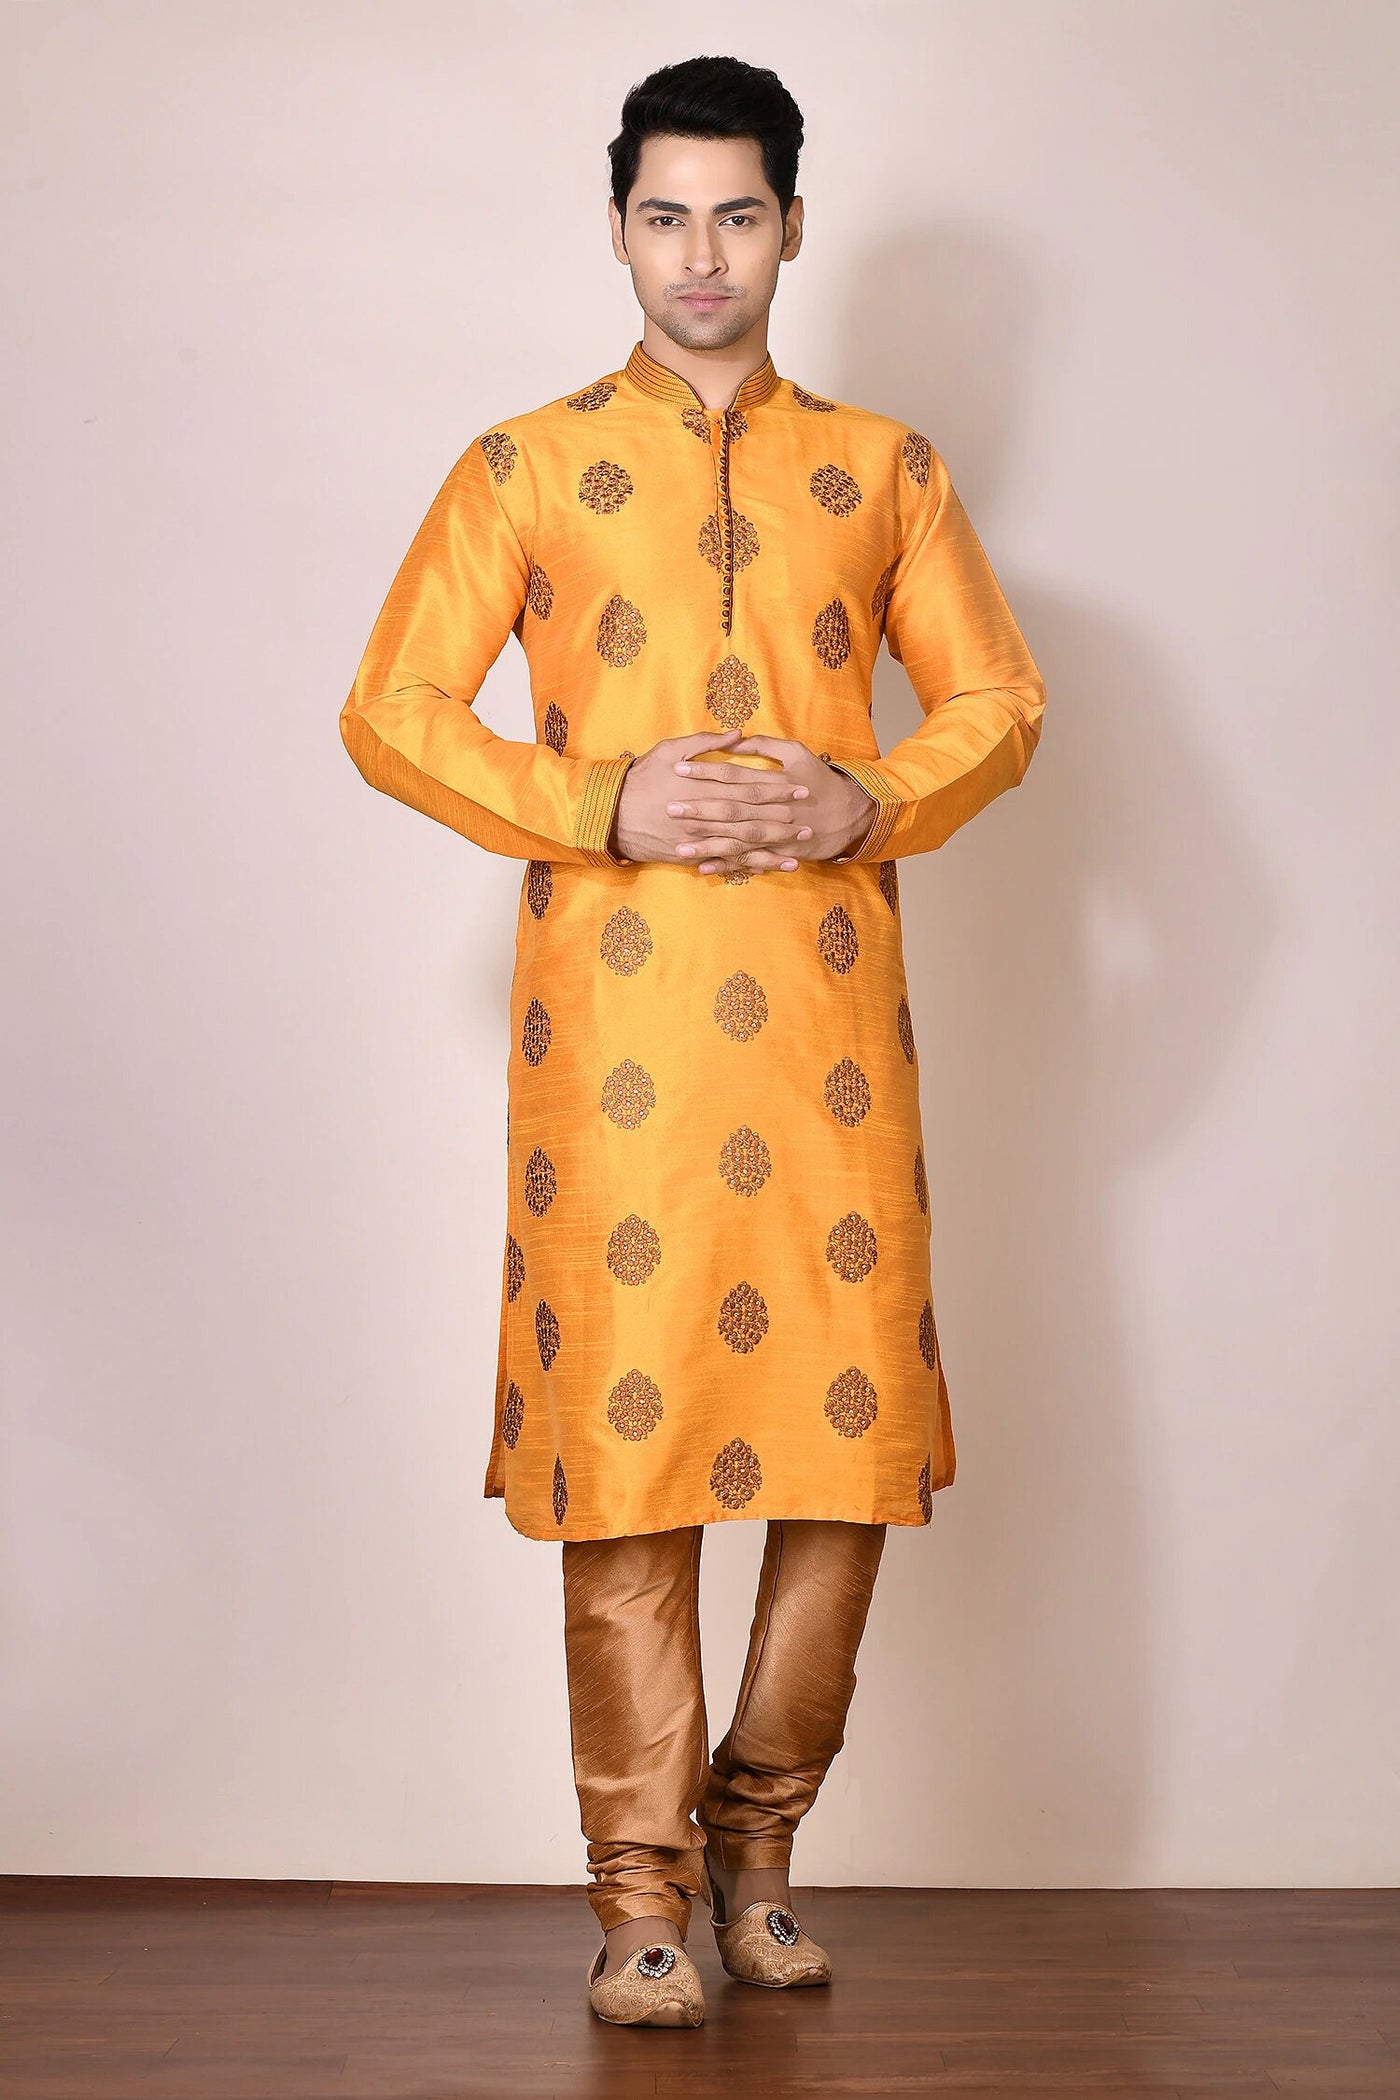 Orange Kurta Set Indian Clothing in Denver, CO, Aurora, CO, Boulder, CO, Fort Collins, CO, Colorado Springs, CO, Parker, CO, Highlands Ranch, CO, Cherry Creek, CO, Centennial, CO, and Longmont, CO. NATIONWIDE SHIPPING USA- India Fashion X